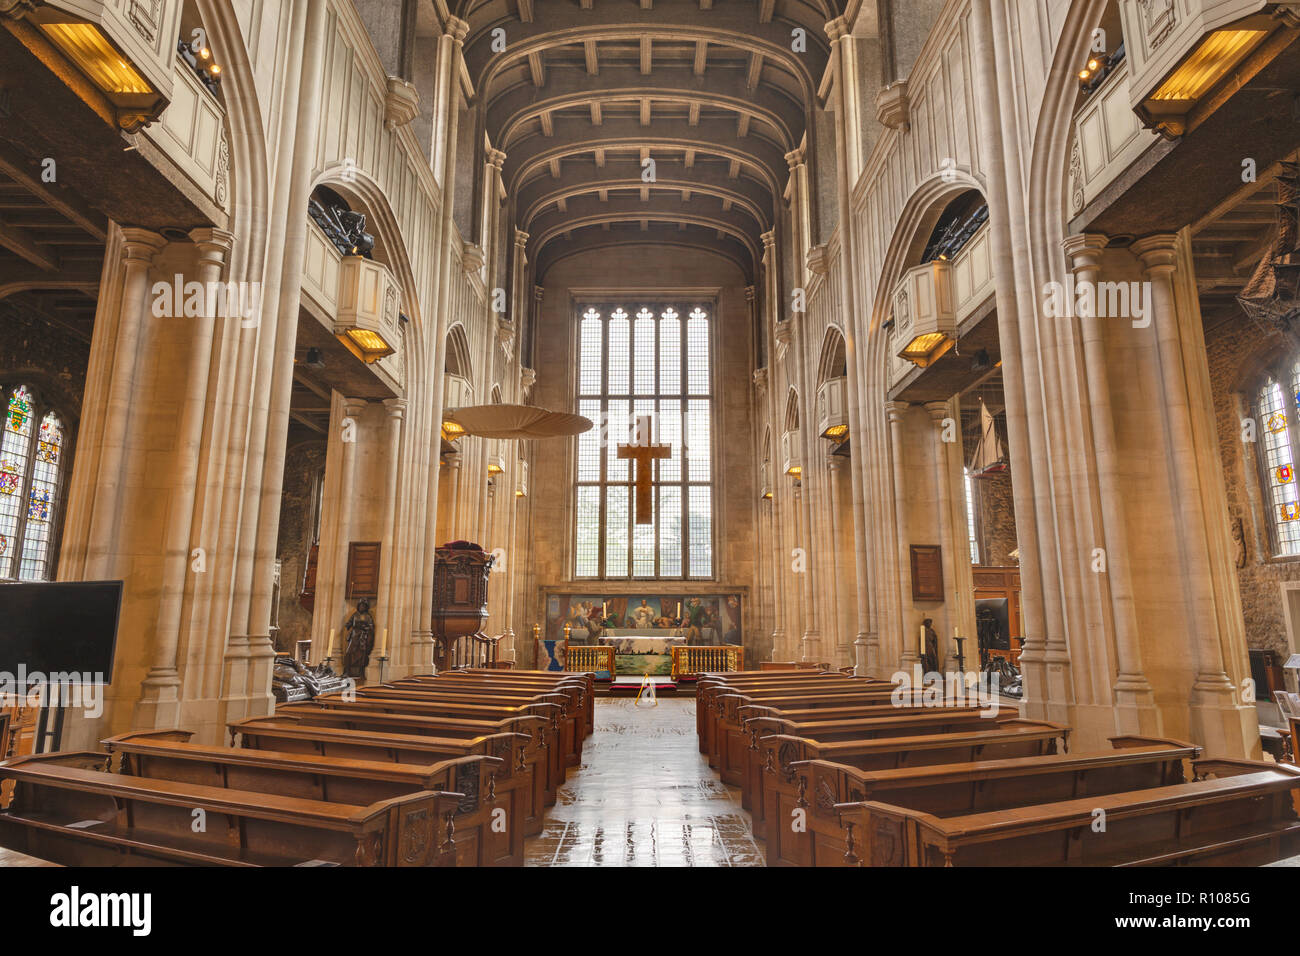 LONDON, GREAT BRITAIN - SEPTEMBER 17, 2017: The nave of church All Hallows. Stock Photo